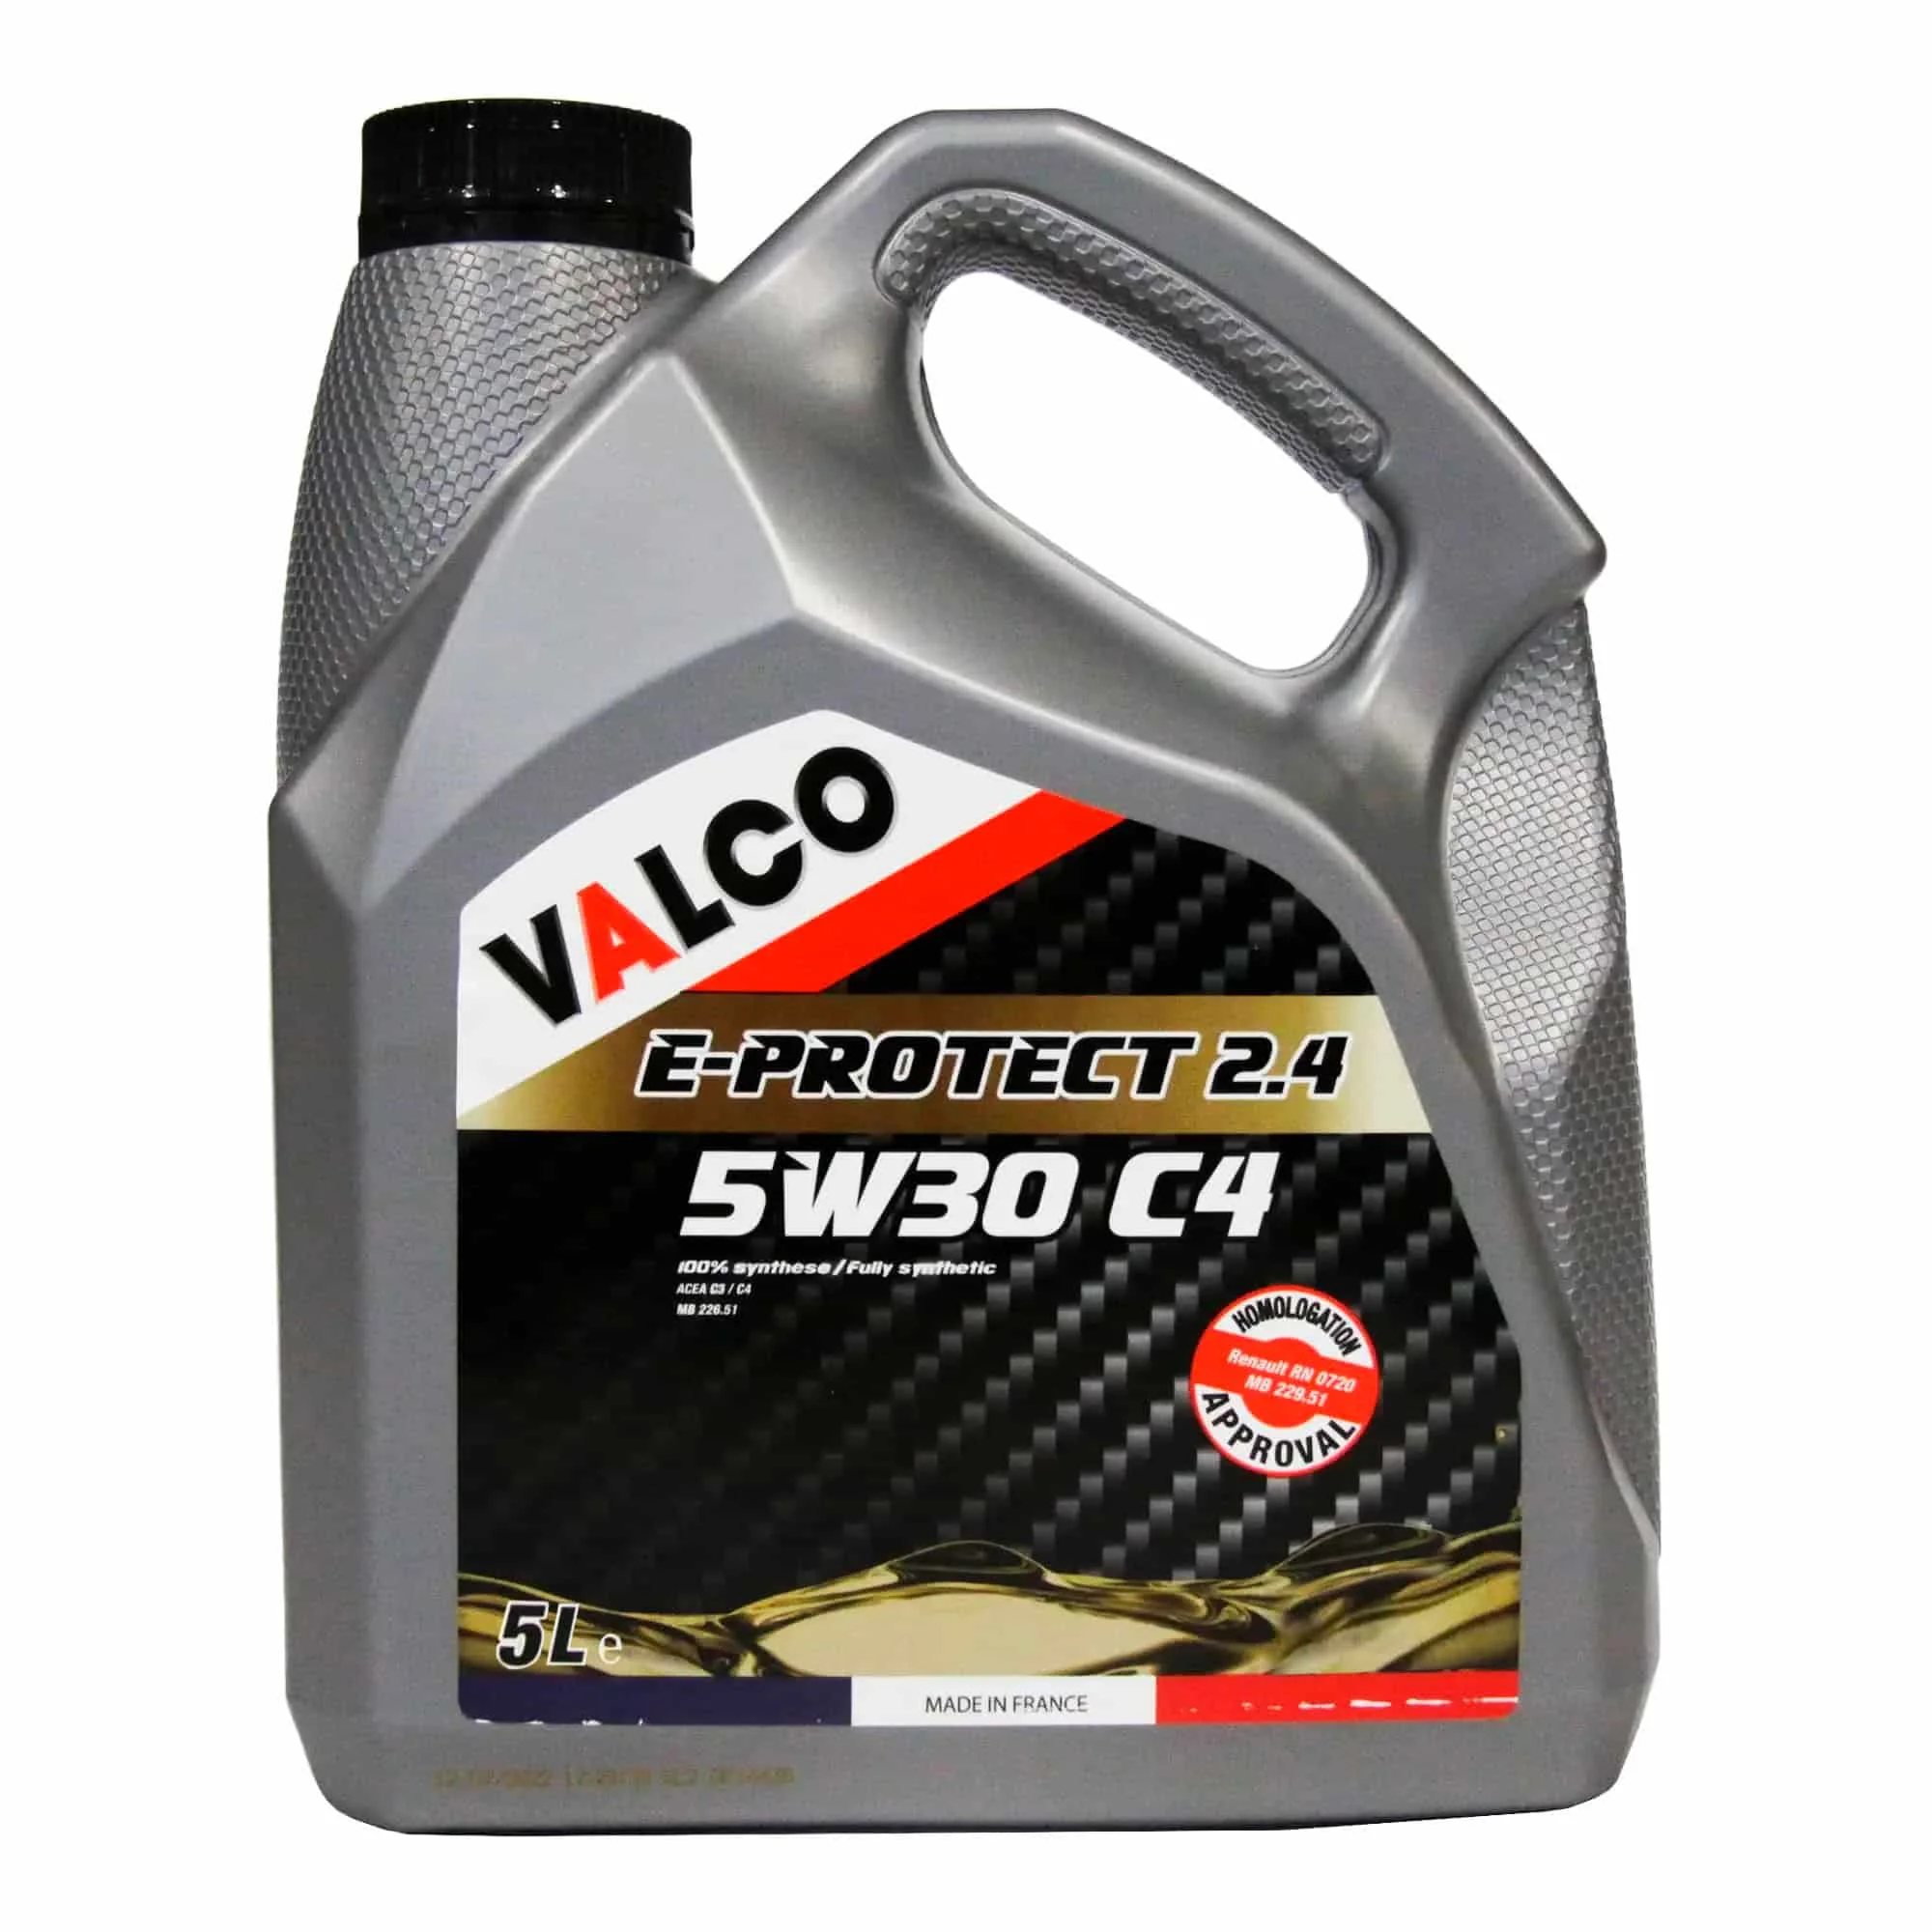 Моторное масло Valco E-Protect 2.4 5W-30 C4 5л